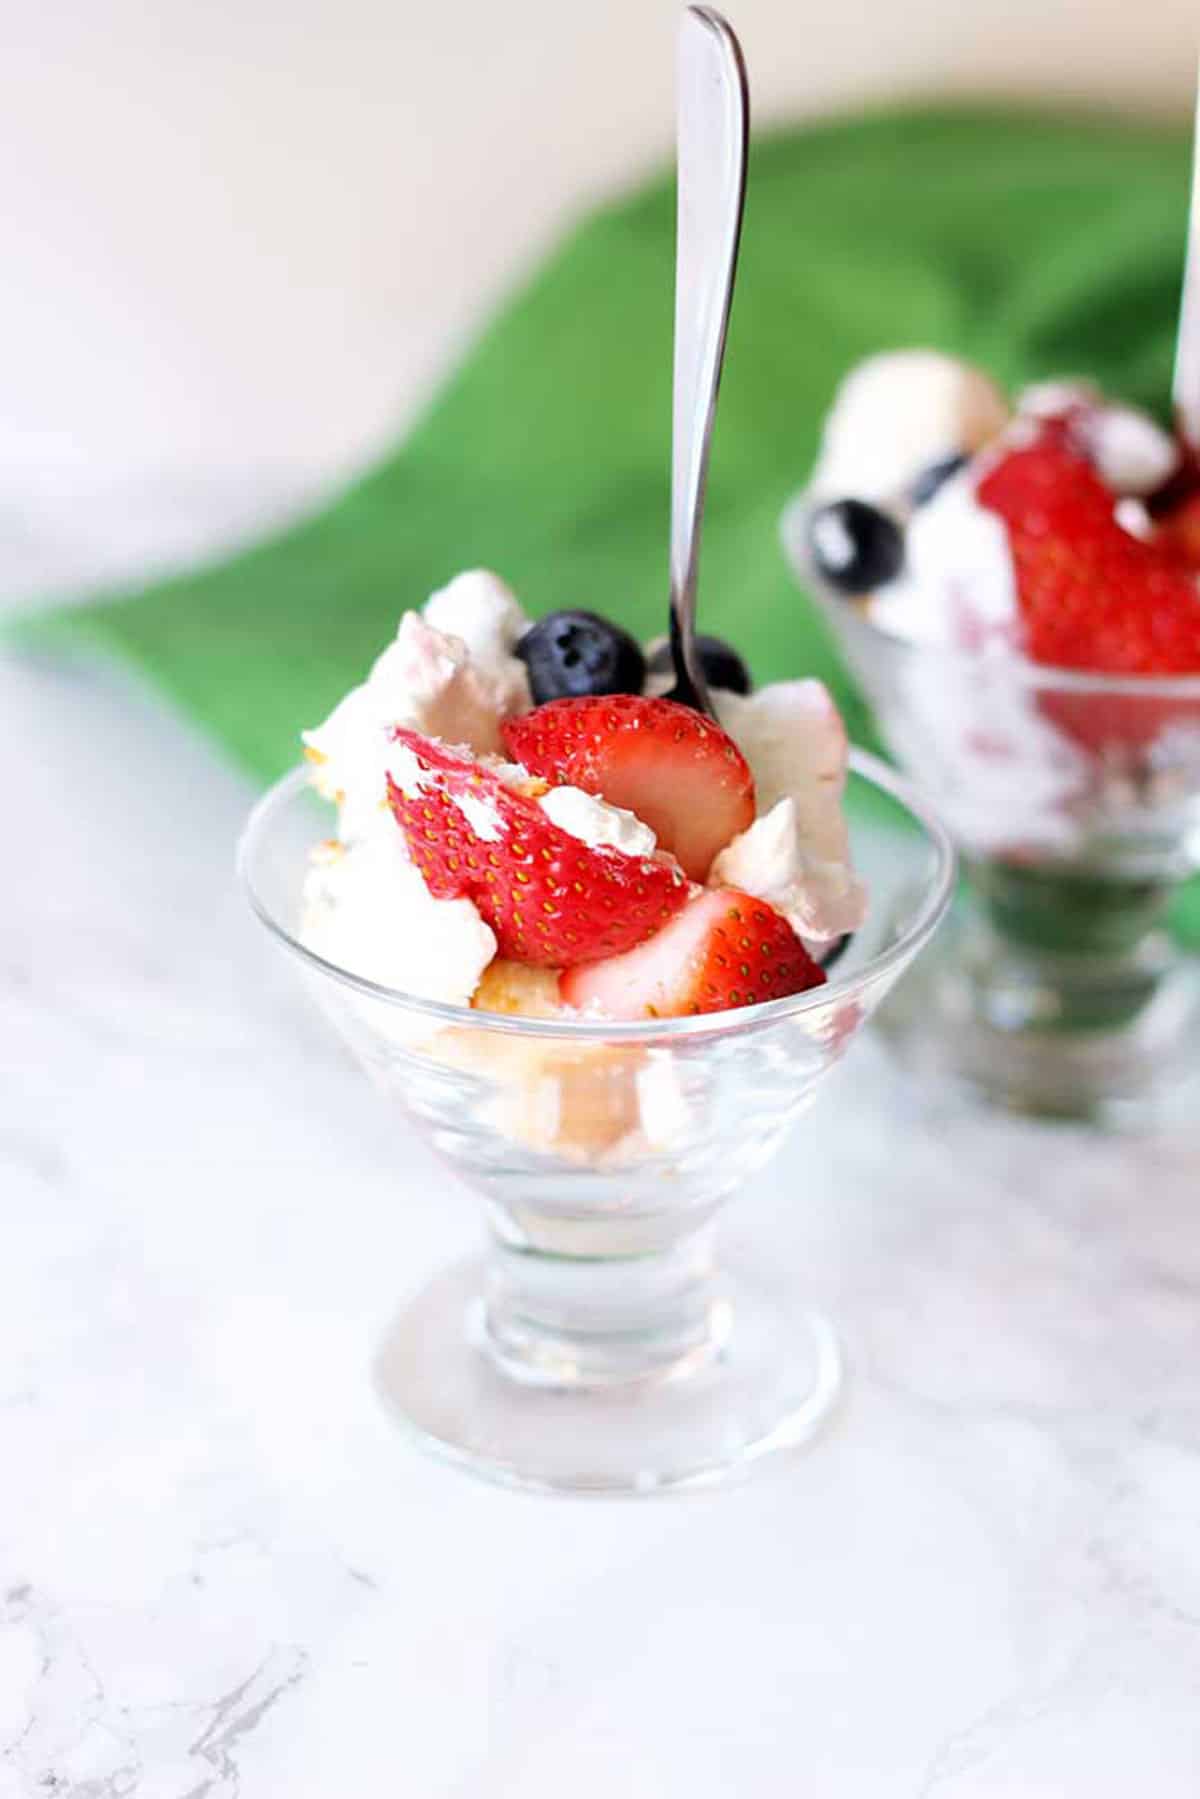 Parfait glass filled with strawberry, blueberry and angel foodmcake trifle with a spoon, green napkin in background.